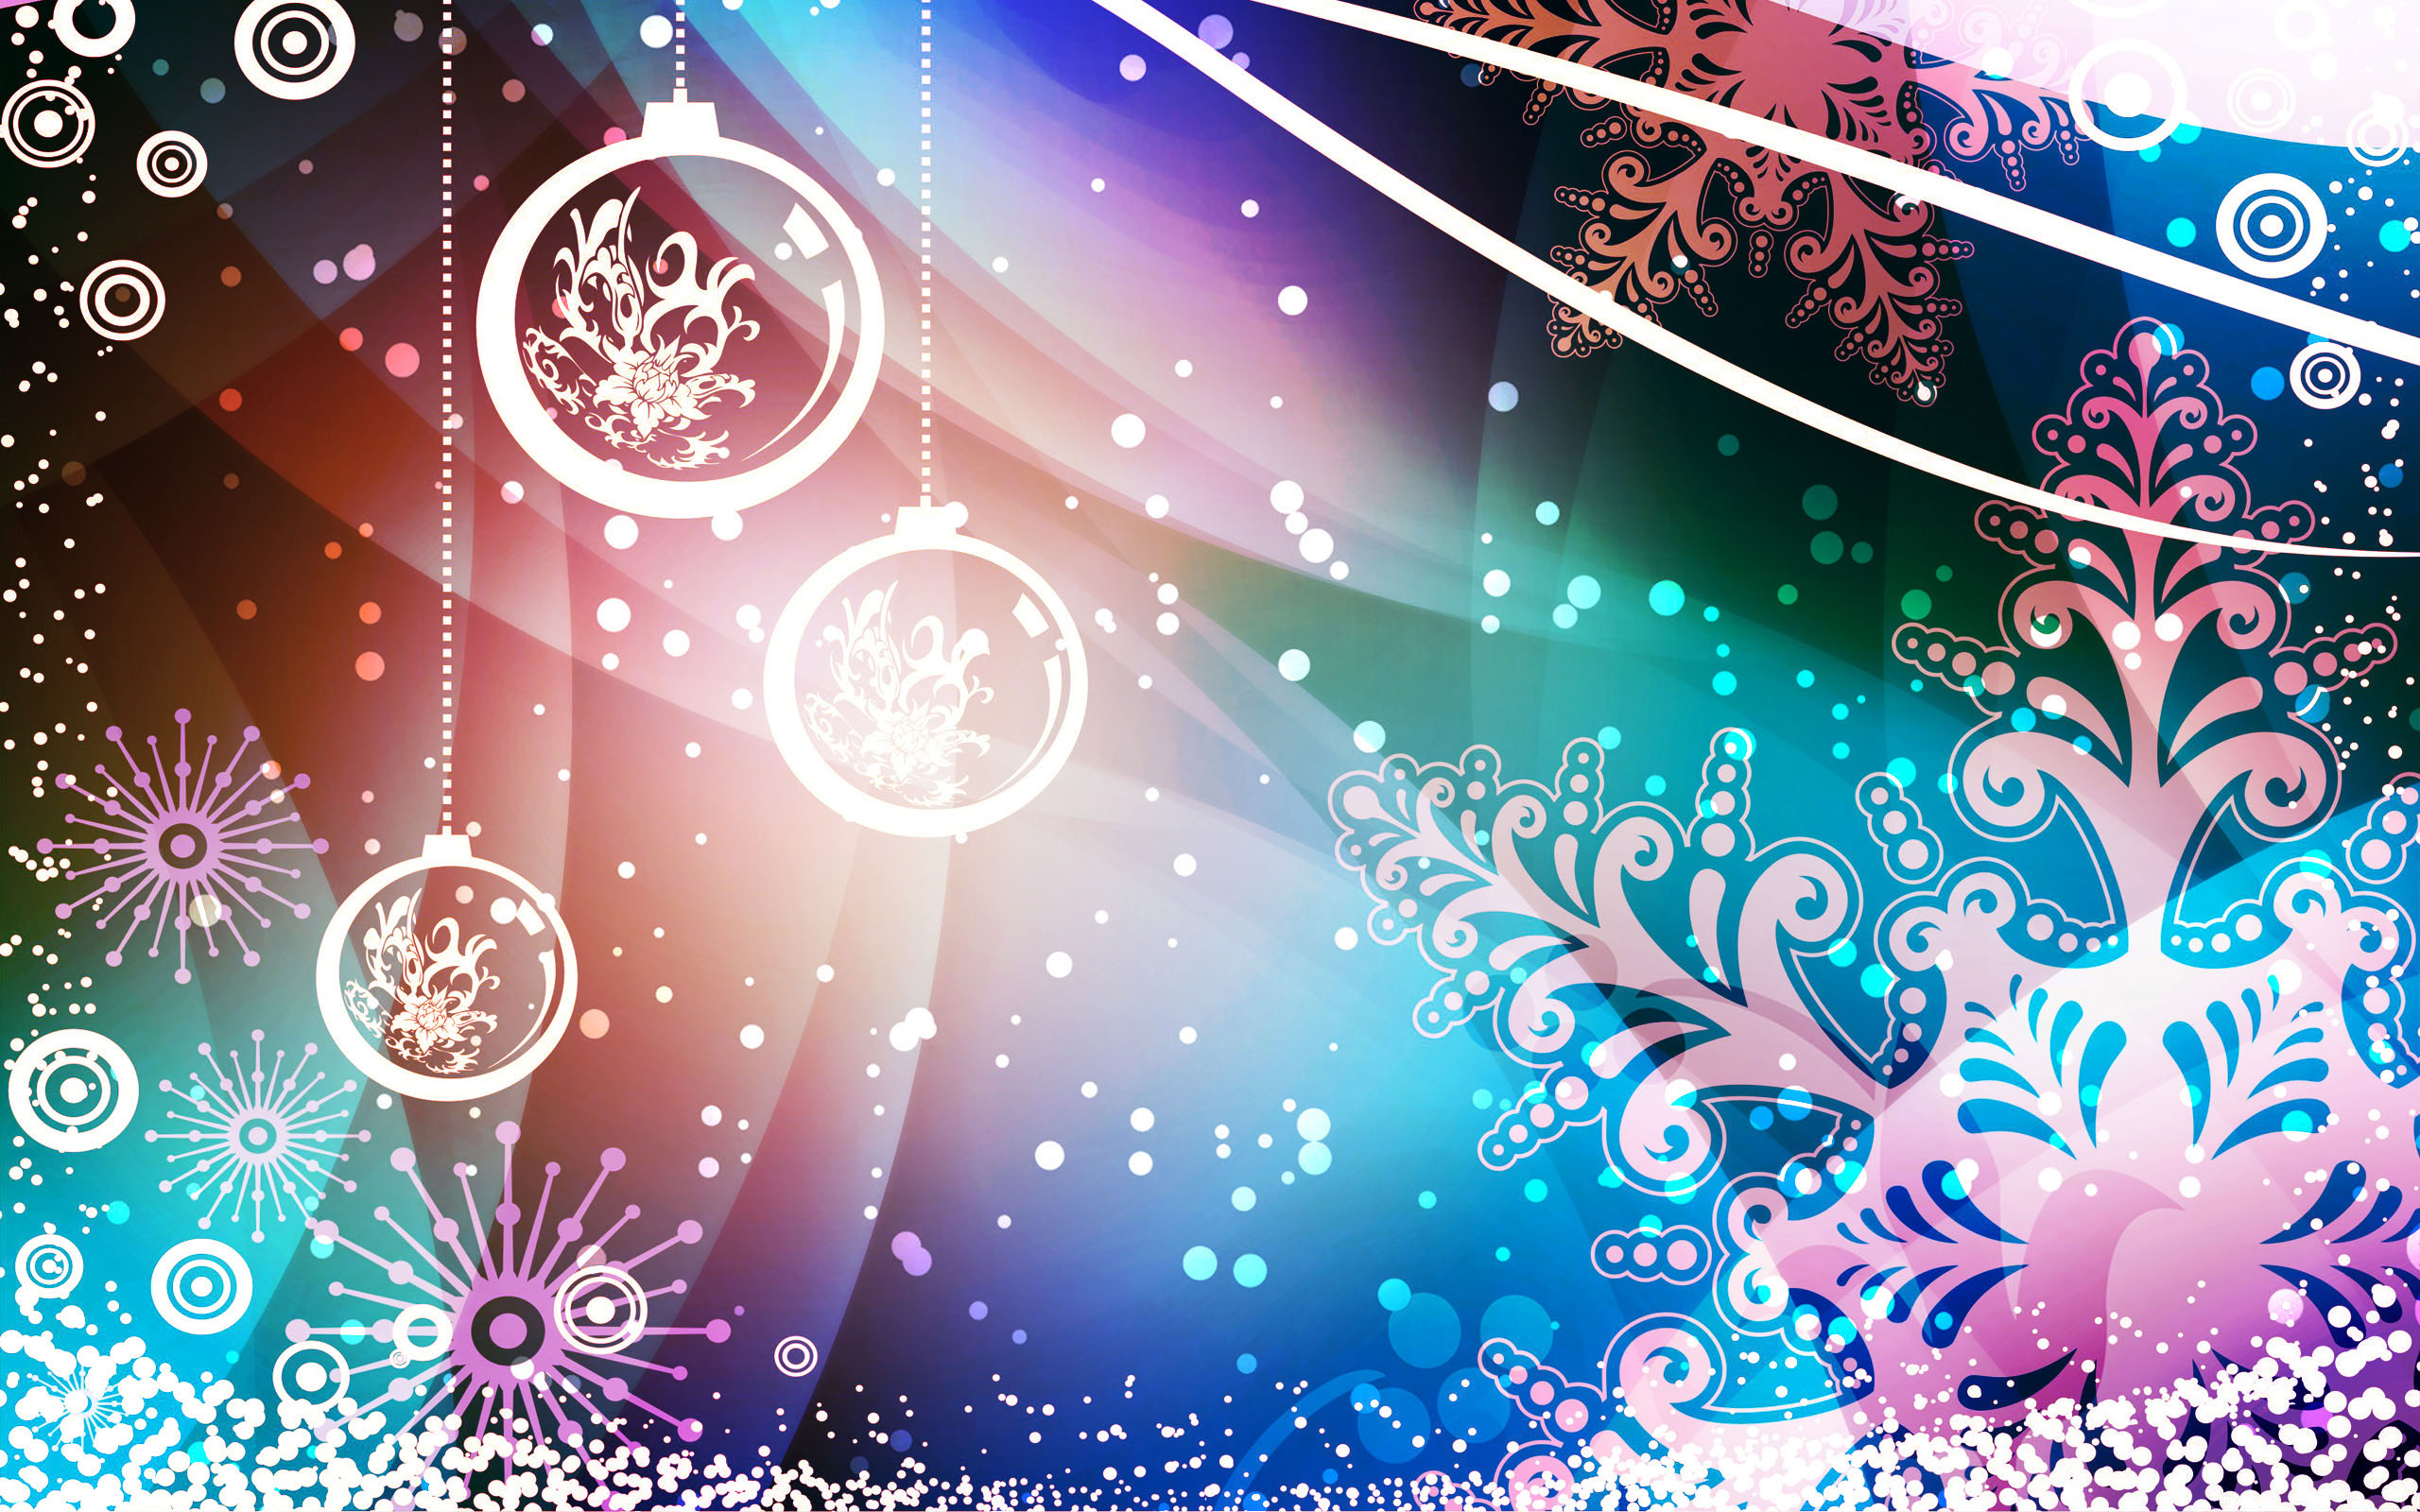 Colored Christmas Vector Design - 2560x1600 - WHQD 16/10 (Wide ...